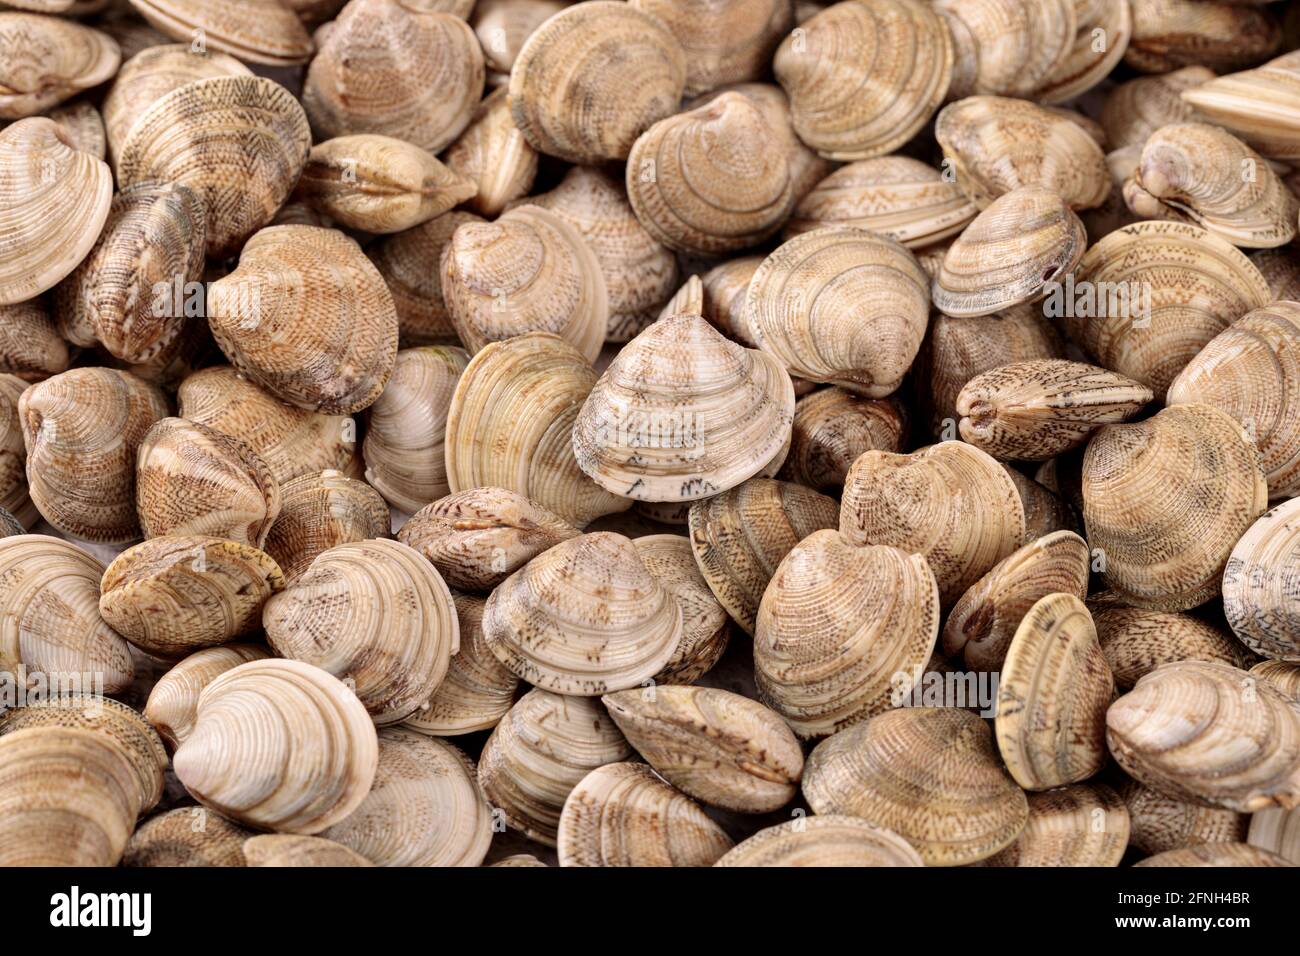 Fresh raw clams one of the main ingredients of the Mediterranean cuisine Stock Photo